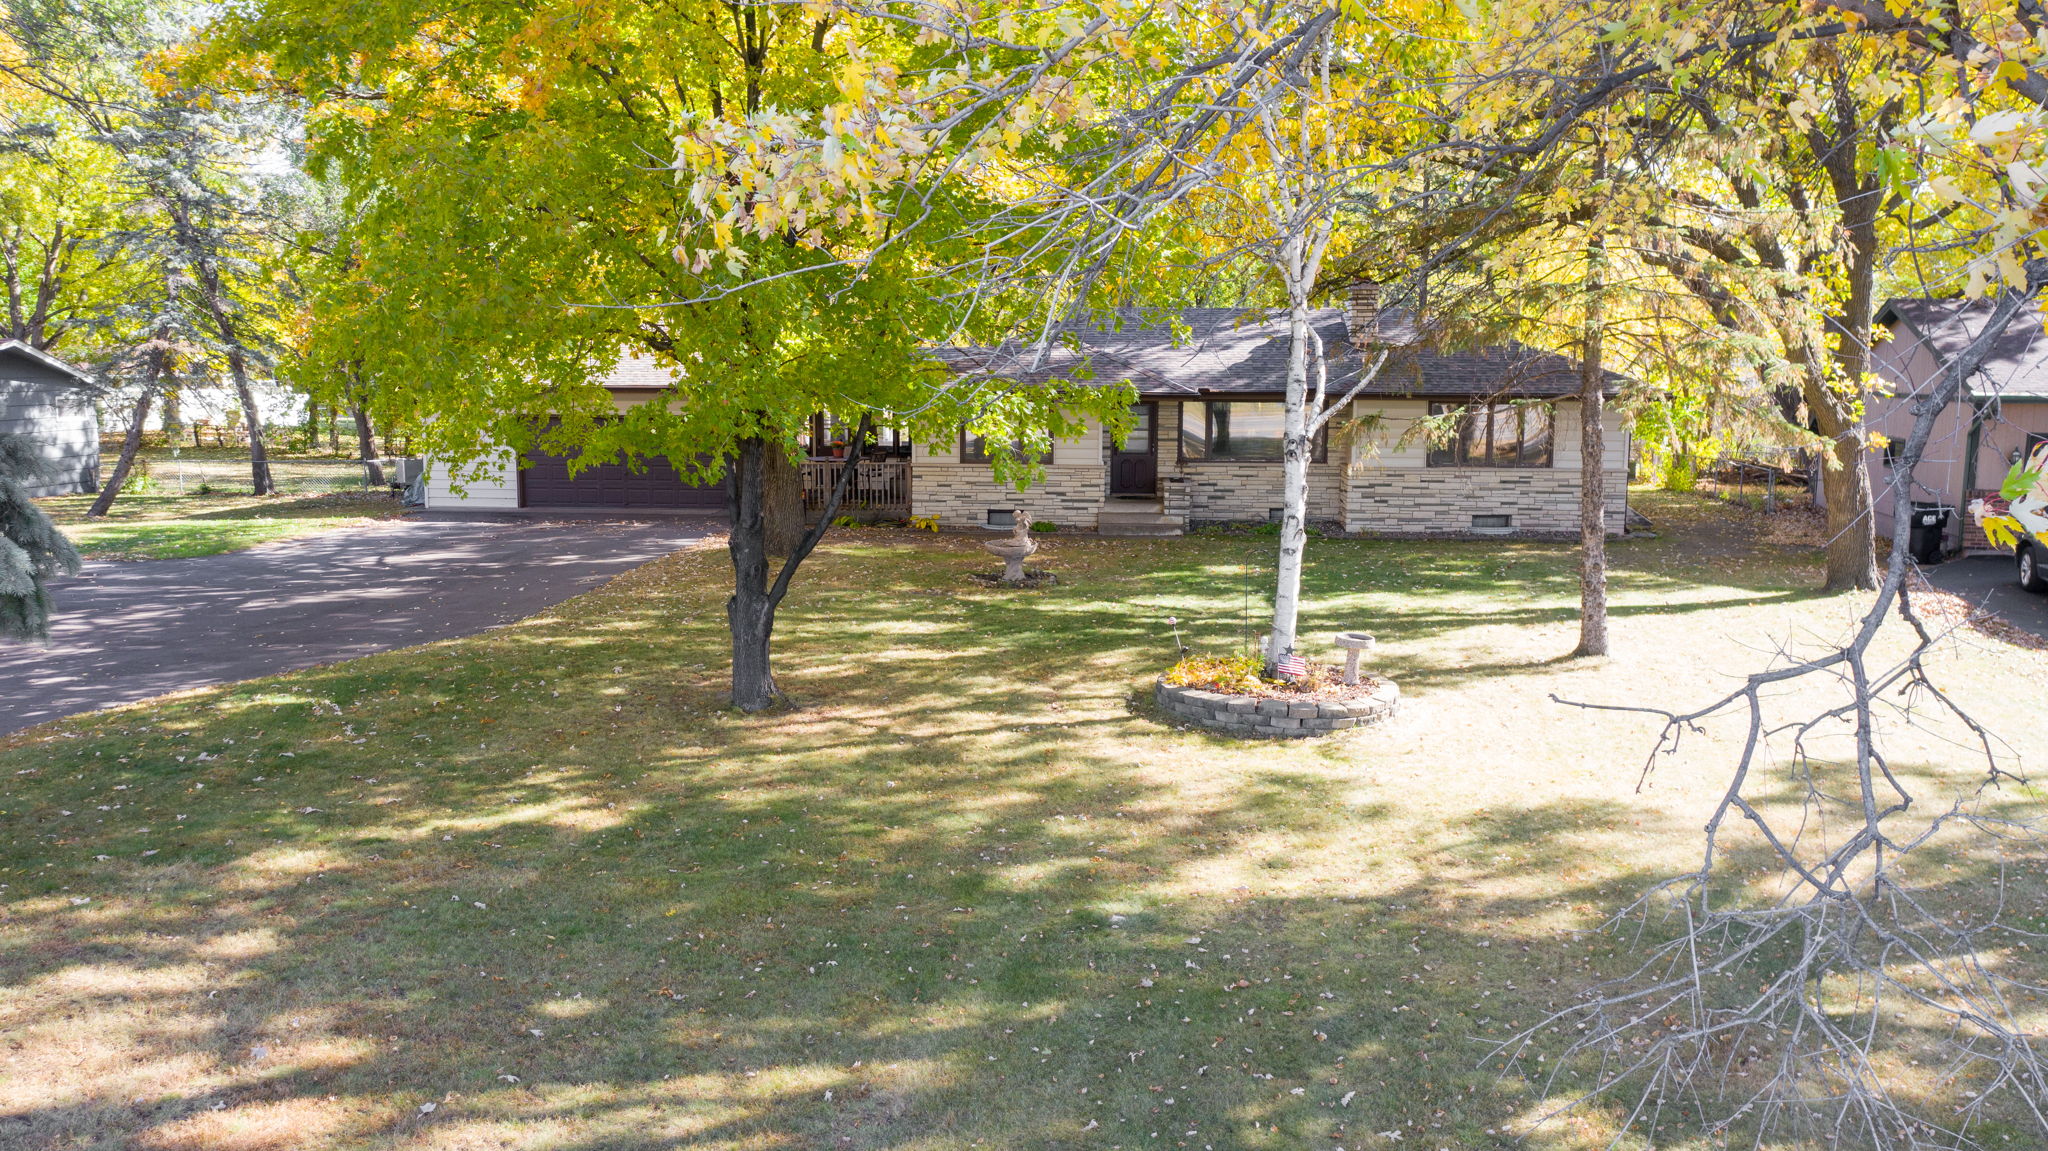  10131 Foley Blvd NW, Coon Rapids, MN 55448, US